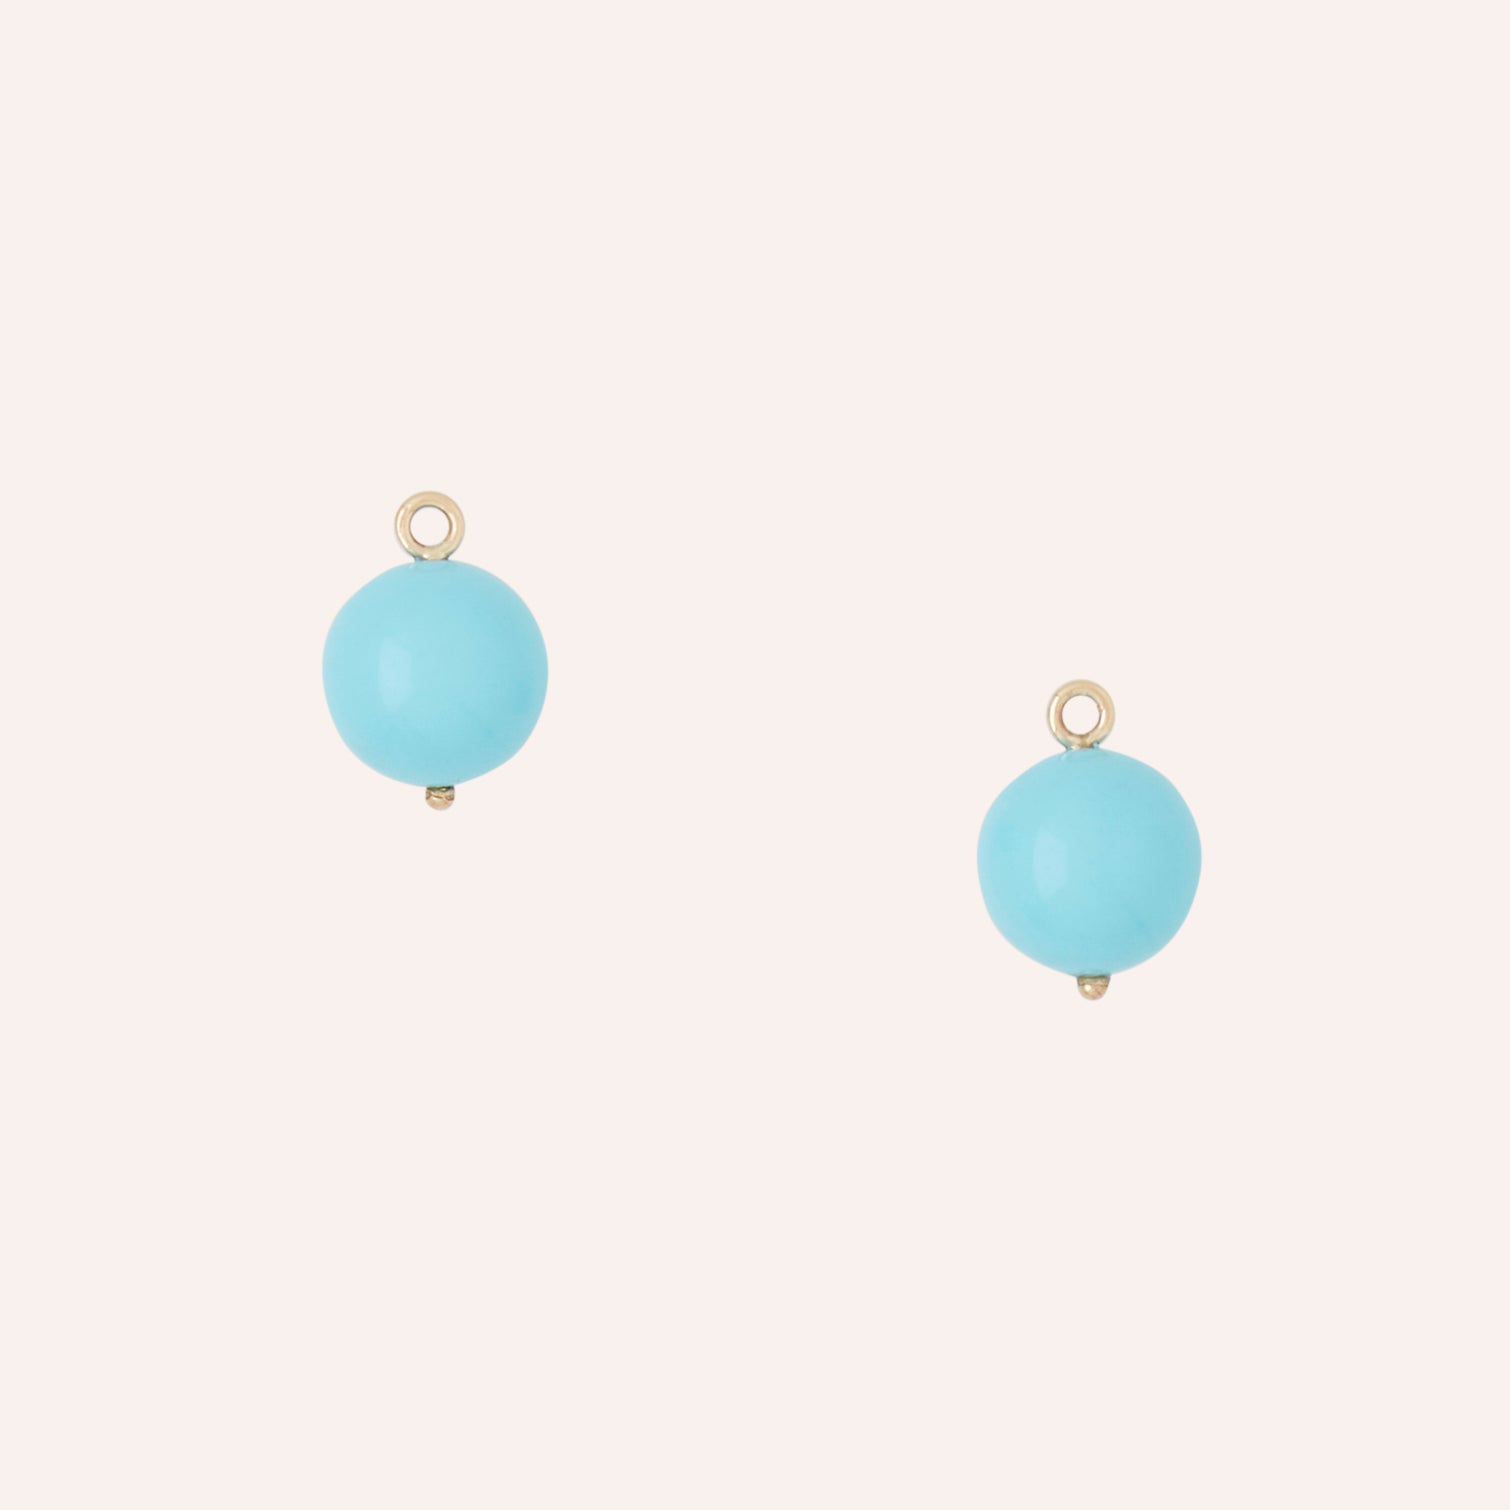 Victoire Reconstituted Turquoise 12mm Earring Drops